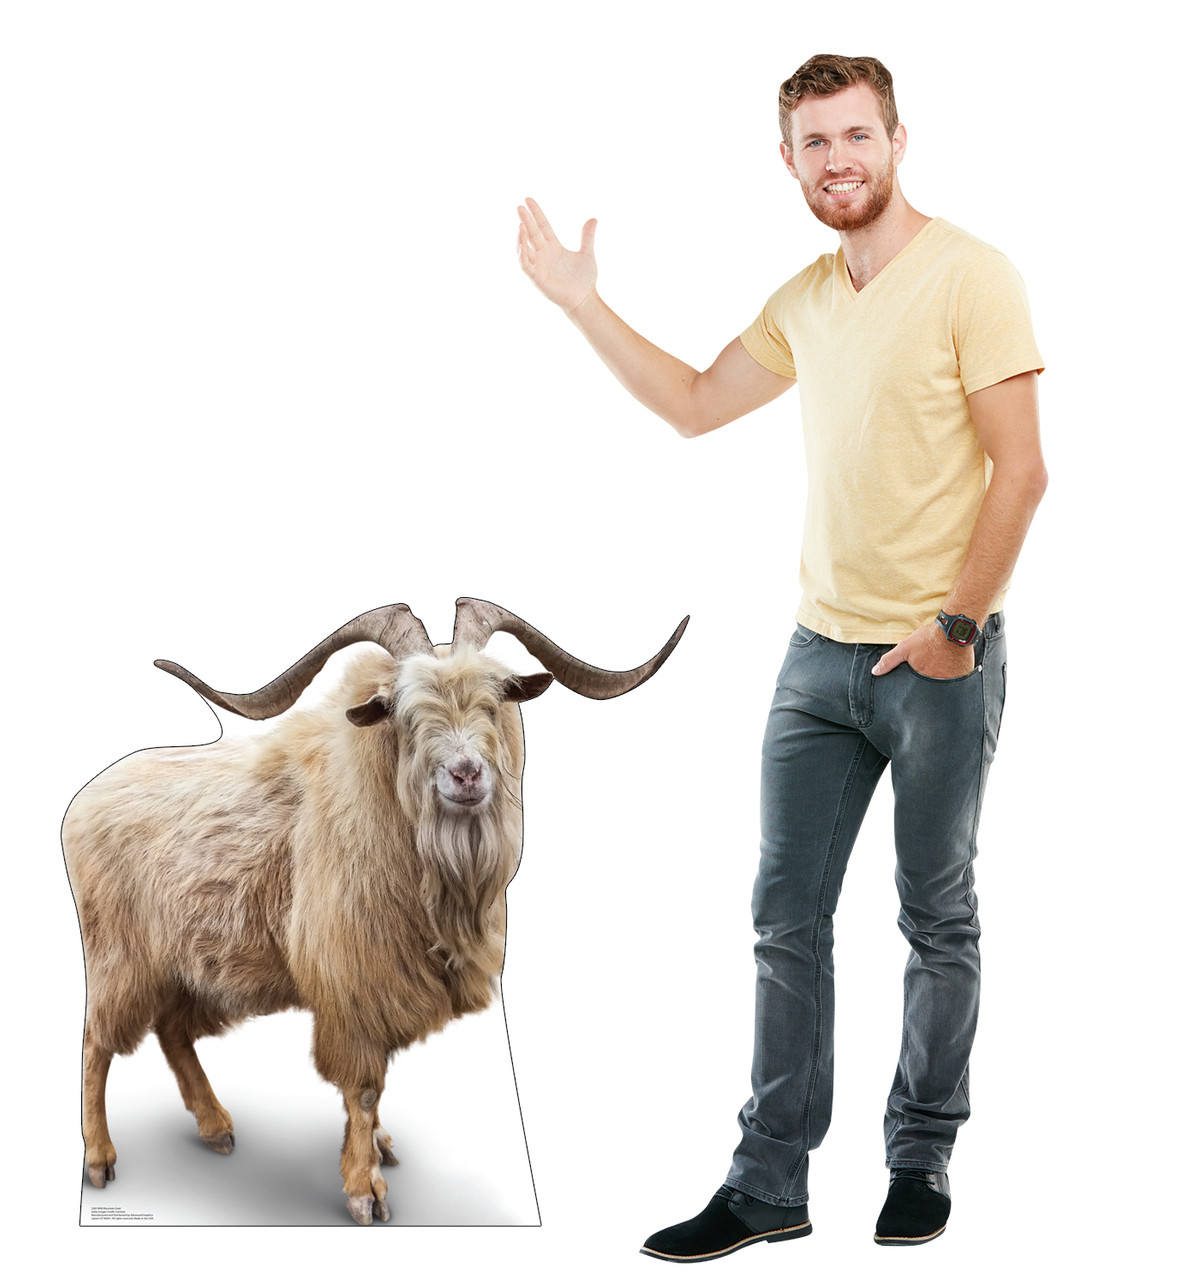 Life-size cardboard standee of a Wild Mountain Goat withmodel.